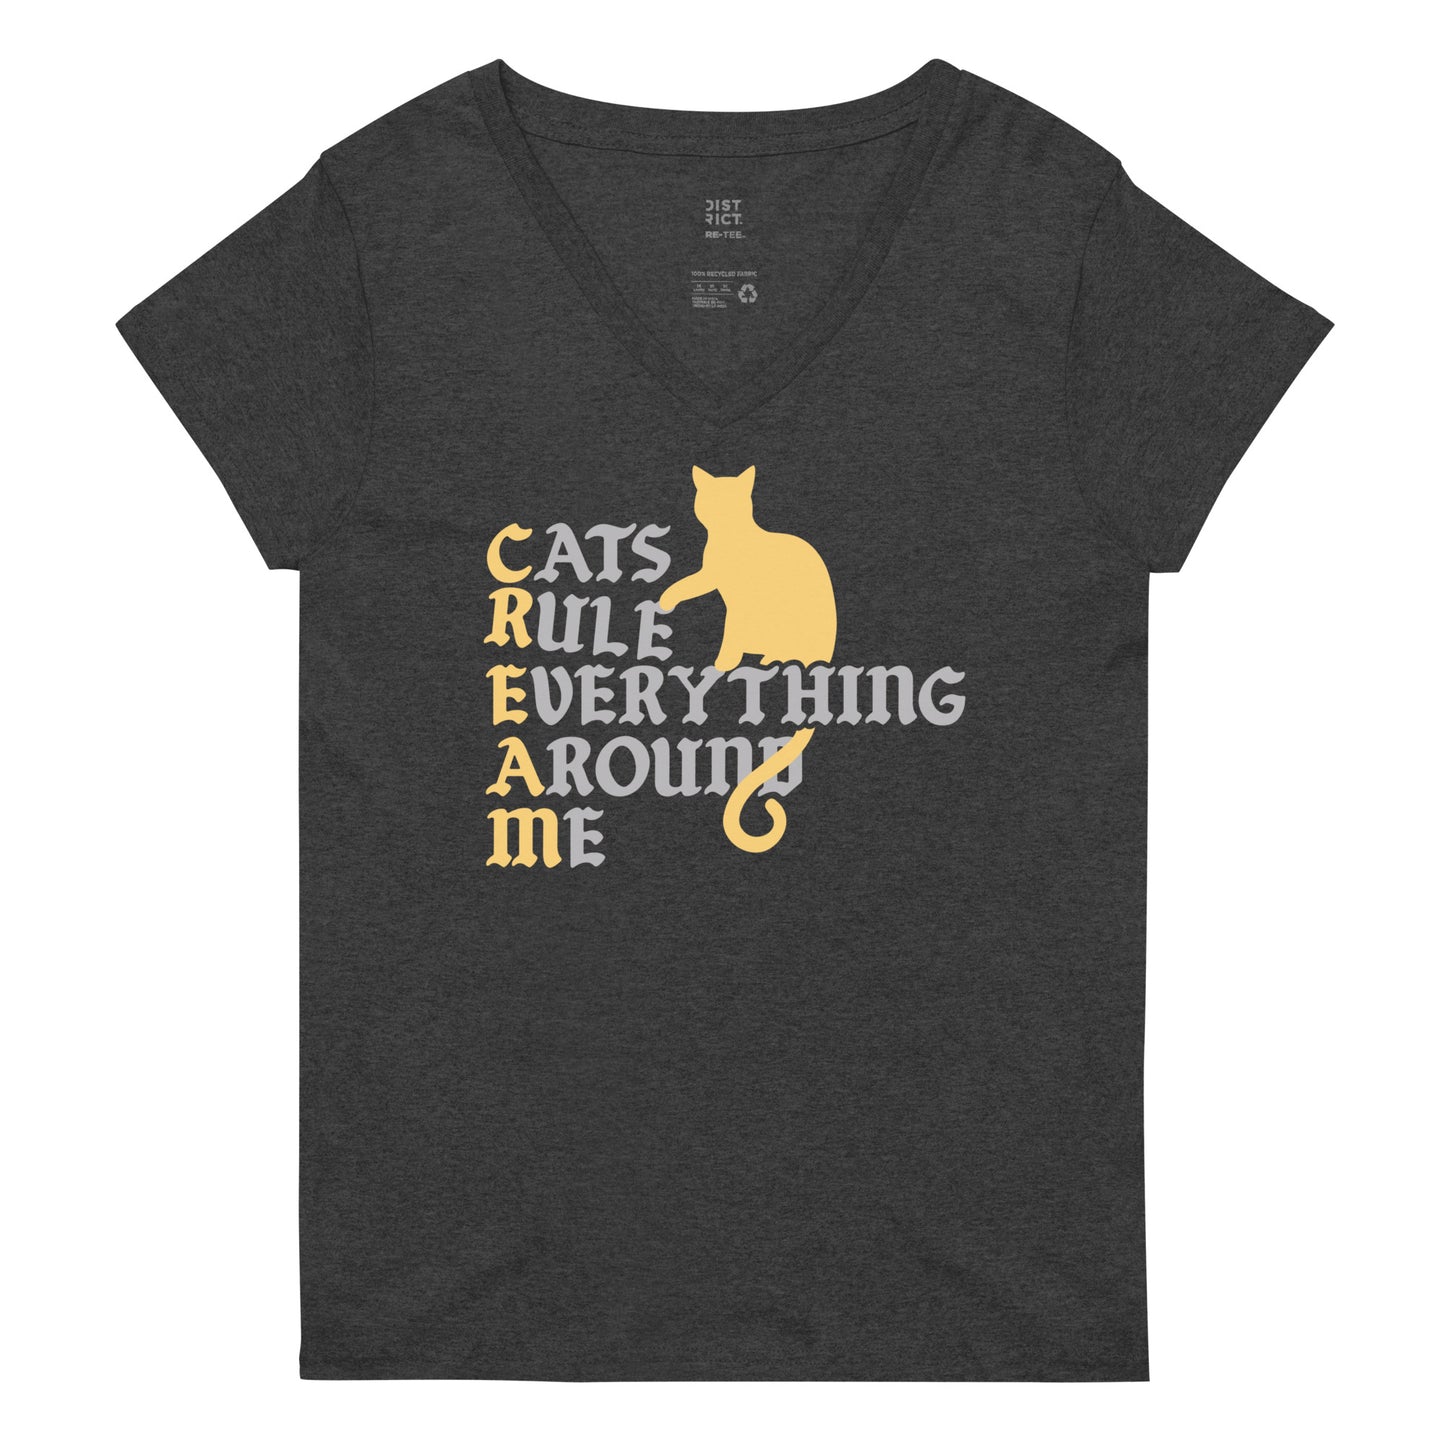 Cats Rule Everything Around Me Women's V-Neck Tee